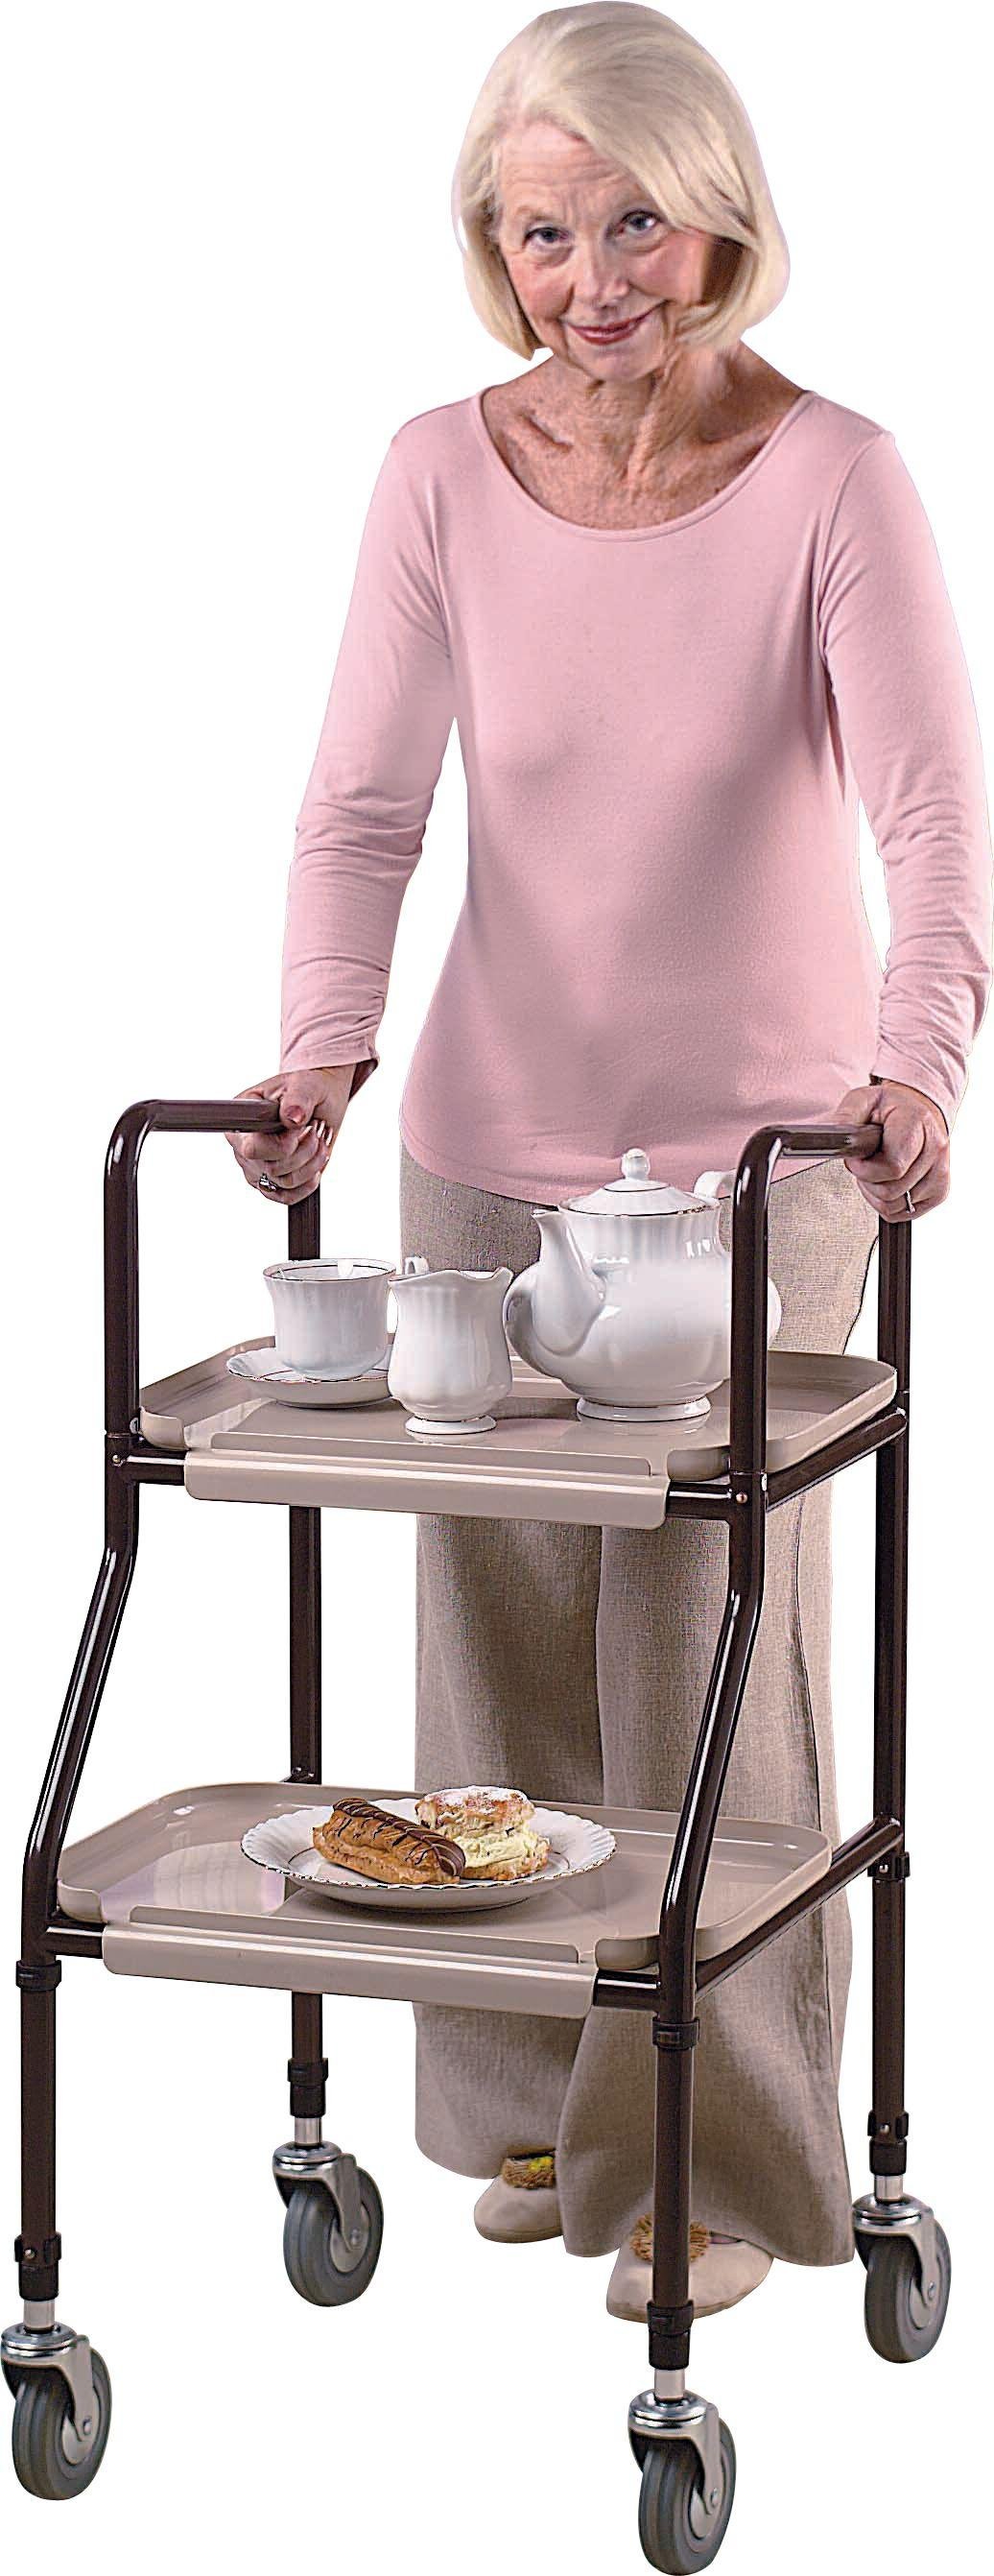 Drive DeVilbiss Healthcare Kitchen Trolley with Detach Trays